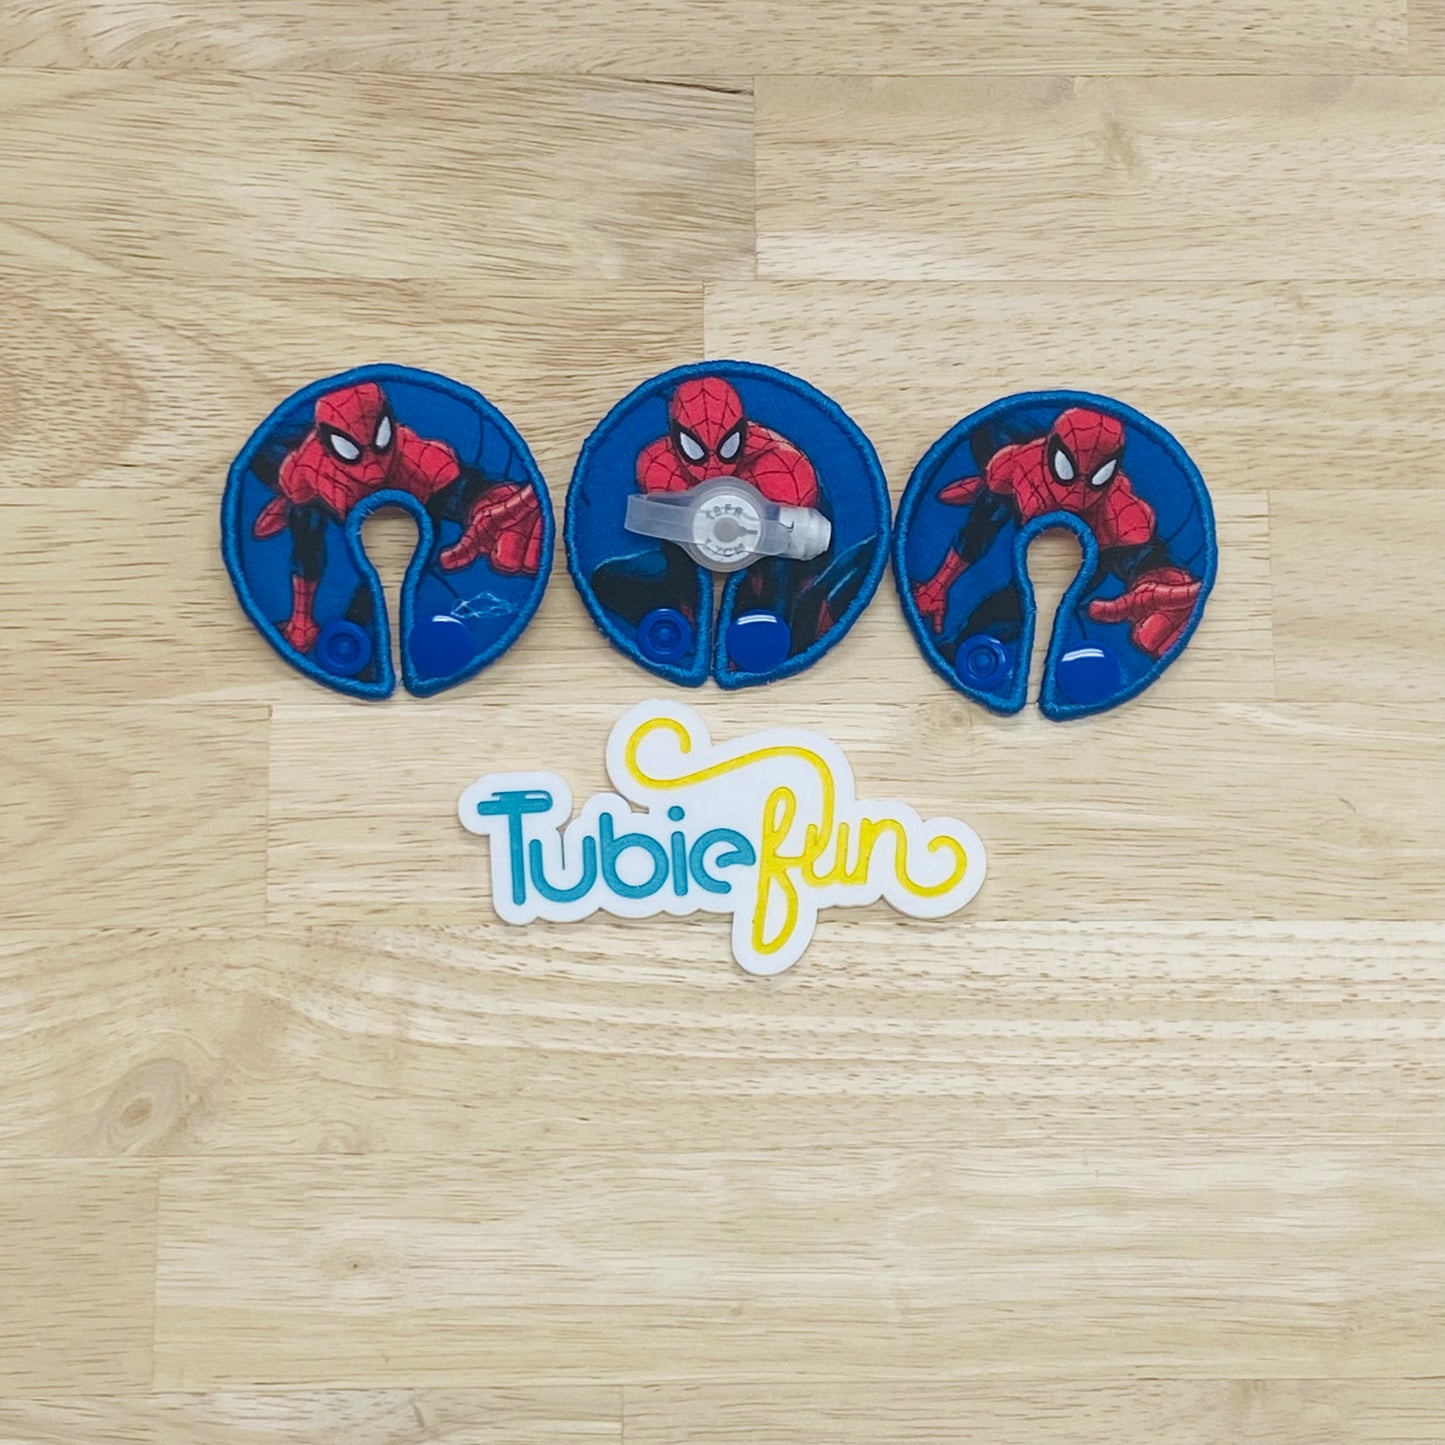 G-Tube Button Pad Cover - Spider Hero on Blue